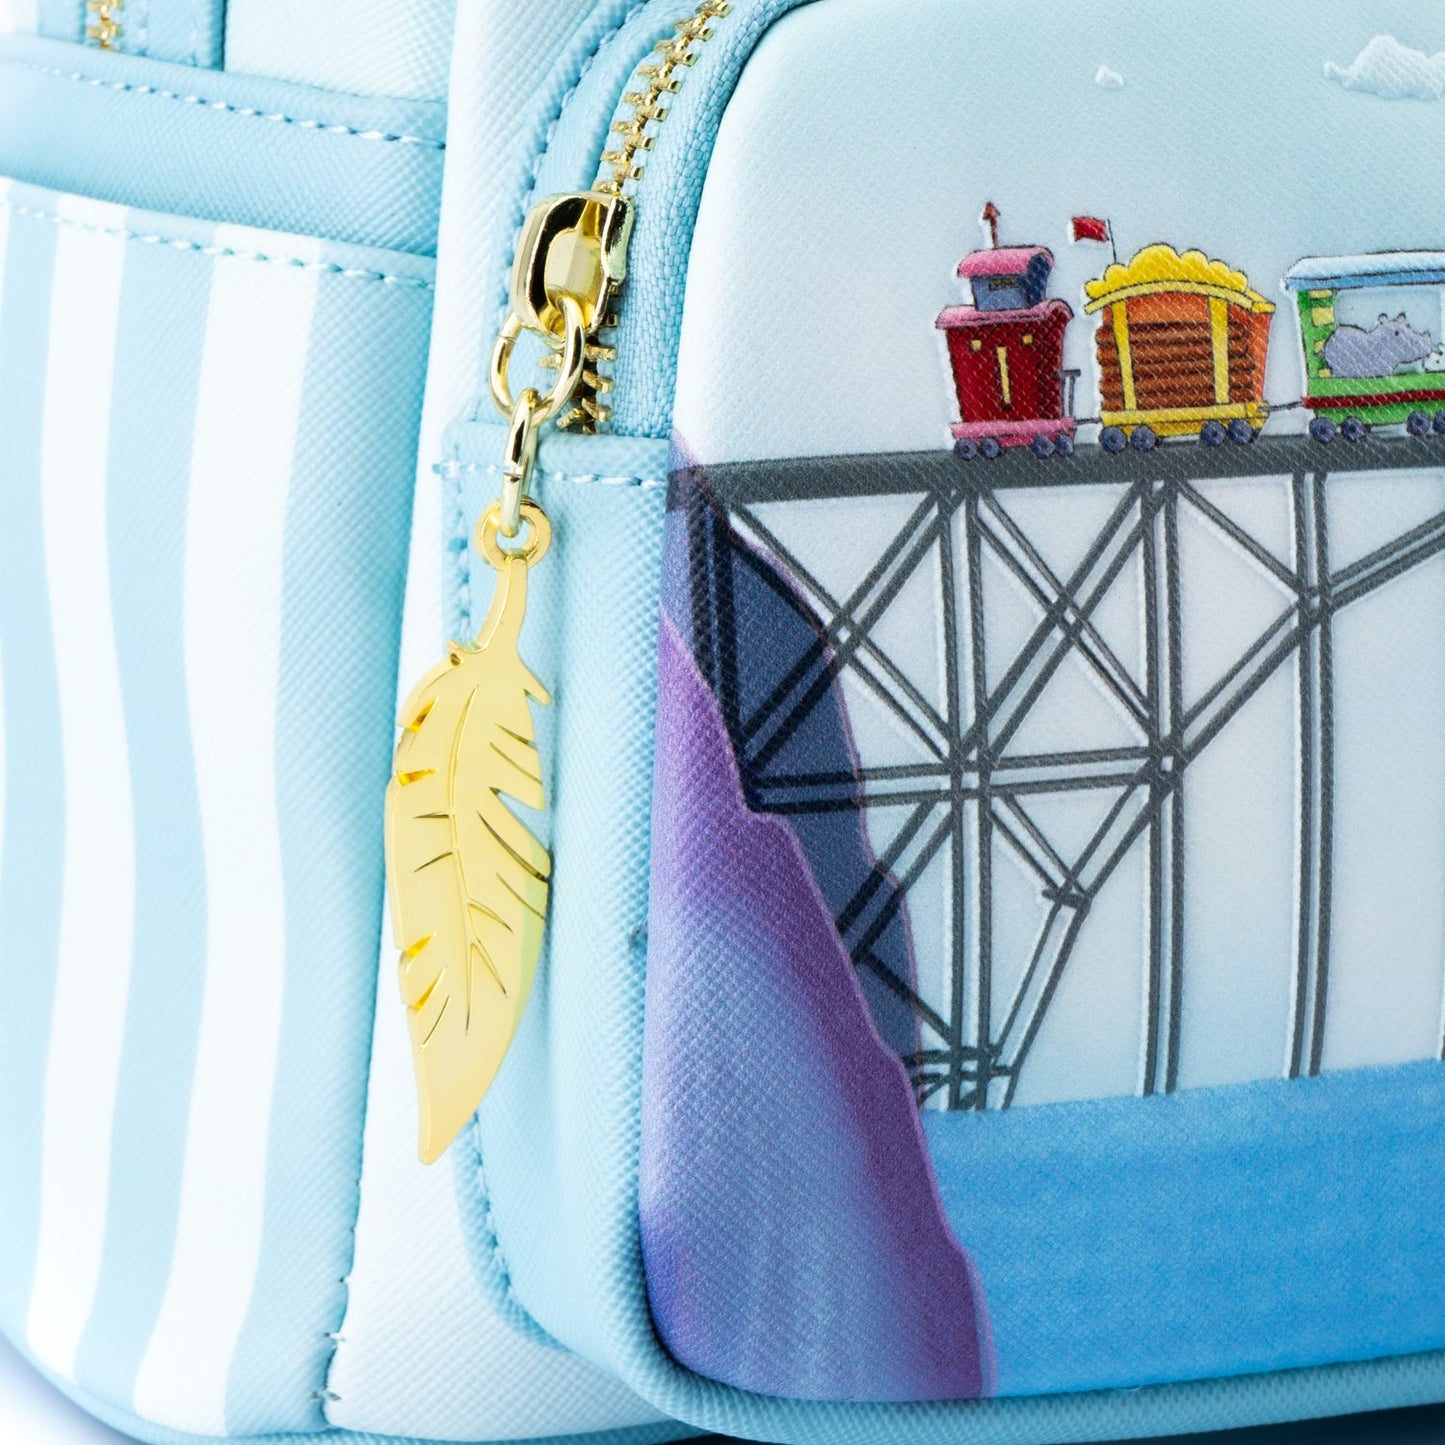 Disney Dumbo Don't Just Fly Mini Backpack-80th Anniversary